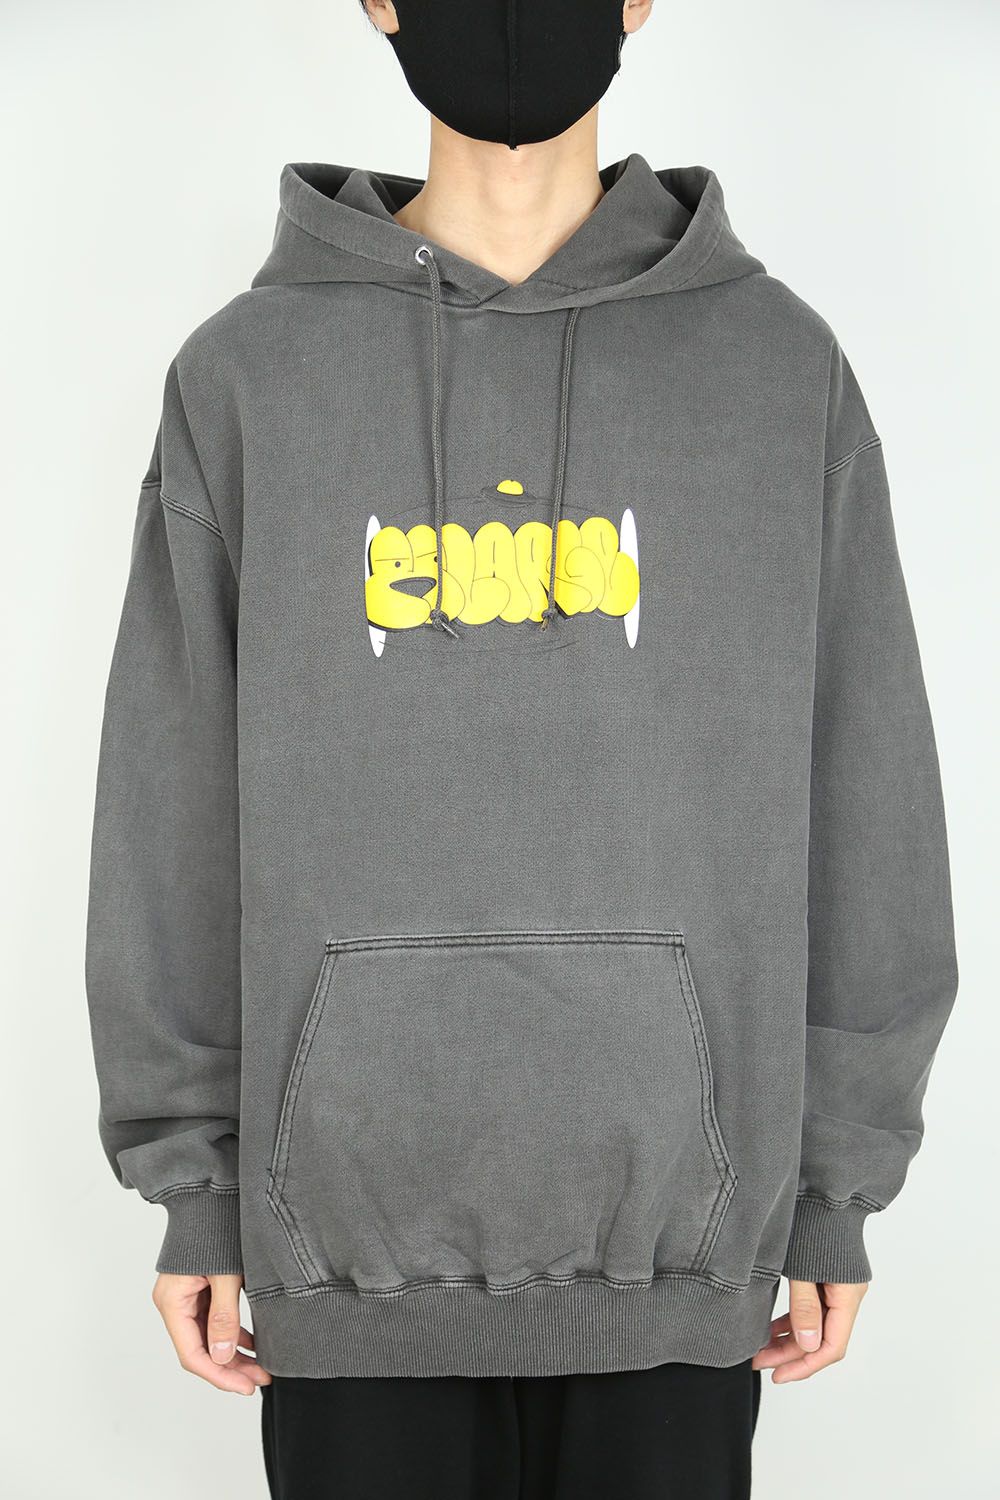 XLARGE - 【人気リピート商品】GRAFFITI PIGMENT PULLOVER HOODED ...